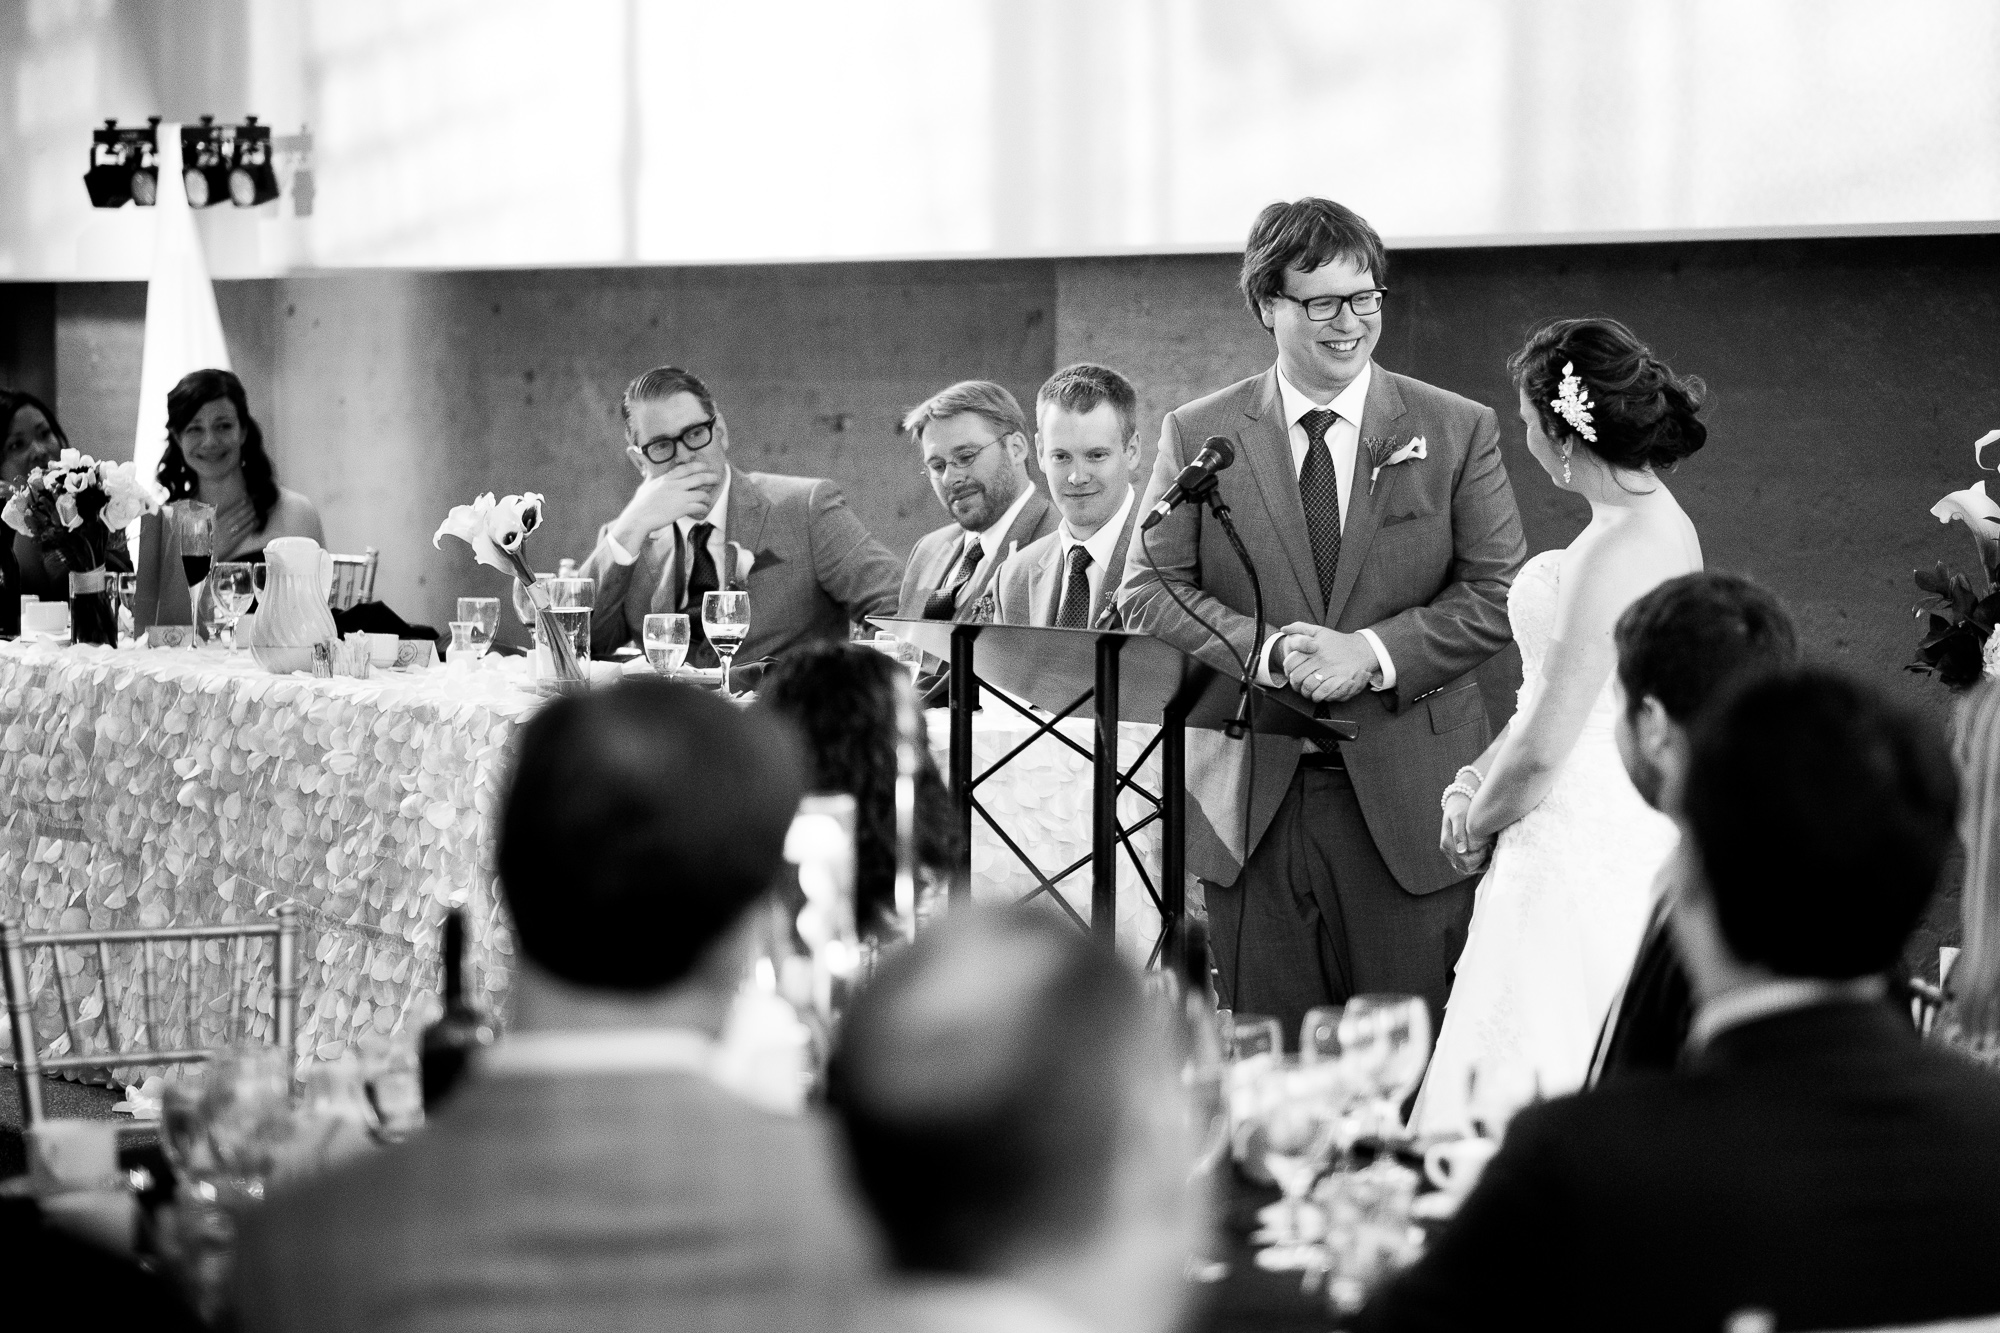  During the wedding reception, Ian toasts his new bride in his speech. 